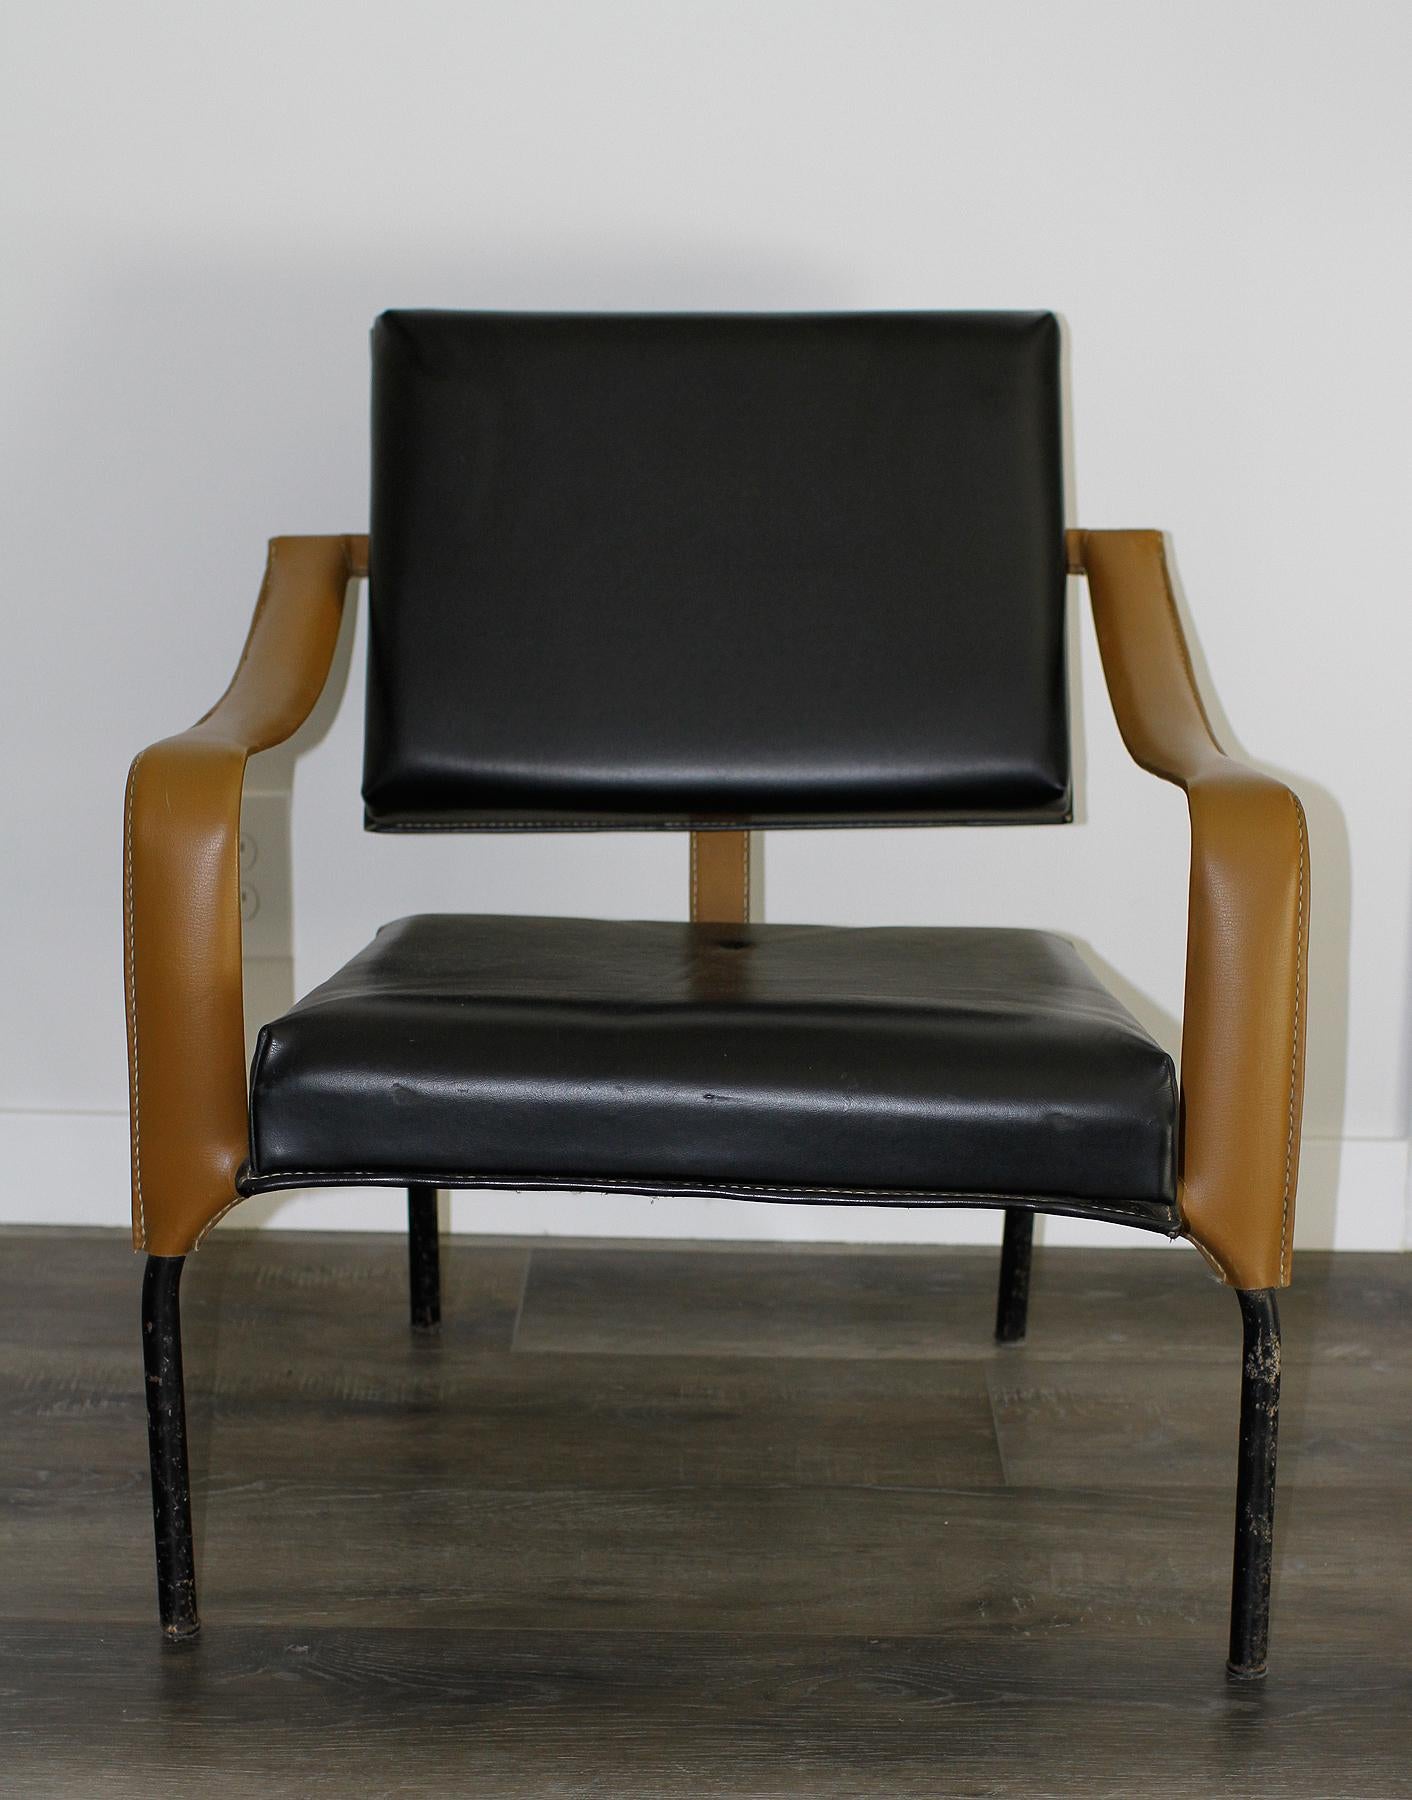 French Jacques Adnet & Mercier Original Pair of Chairs 1955